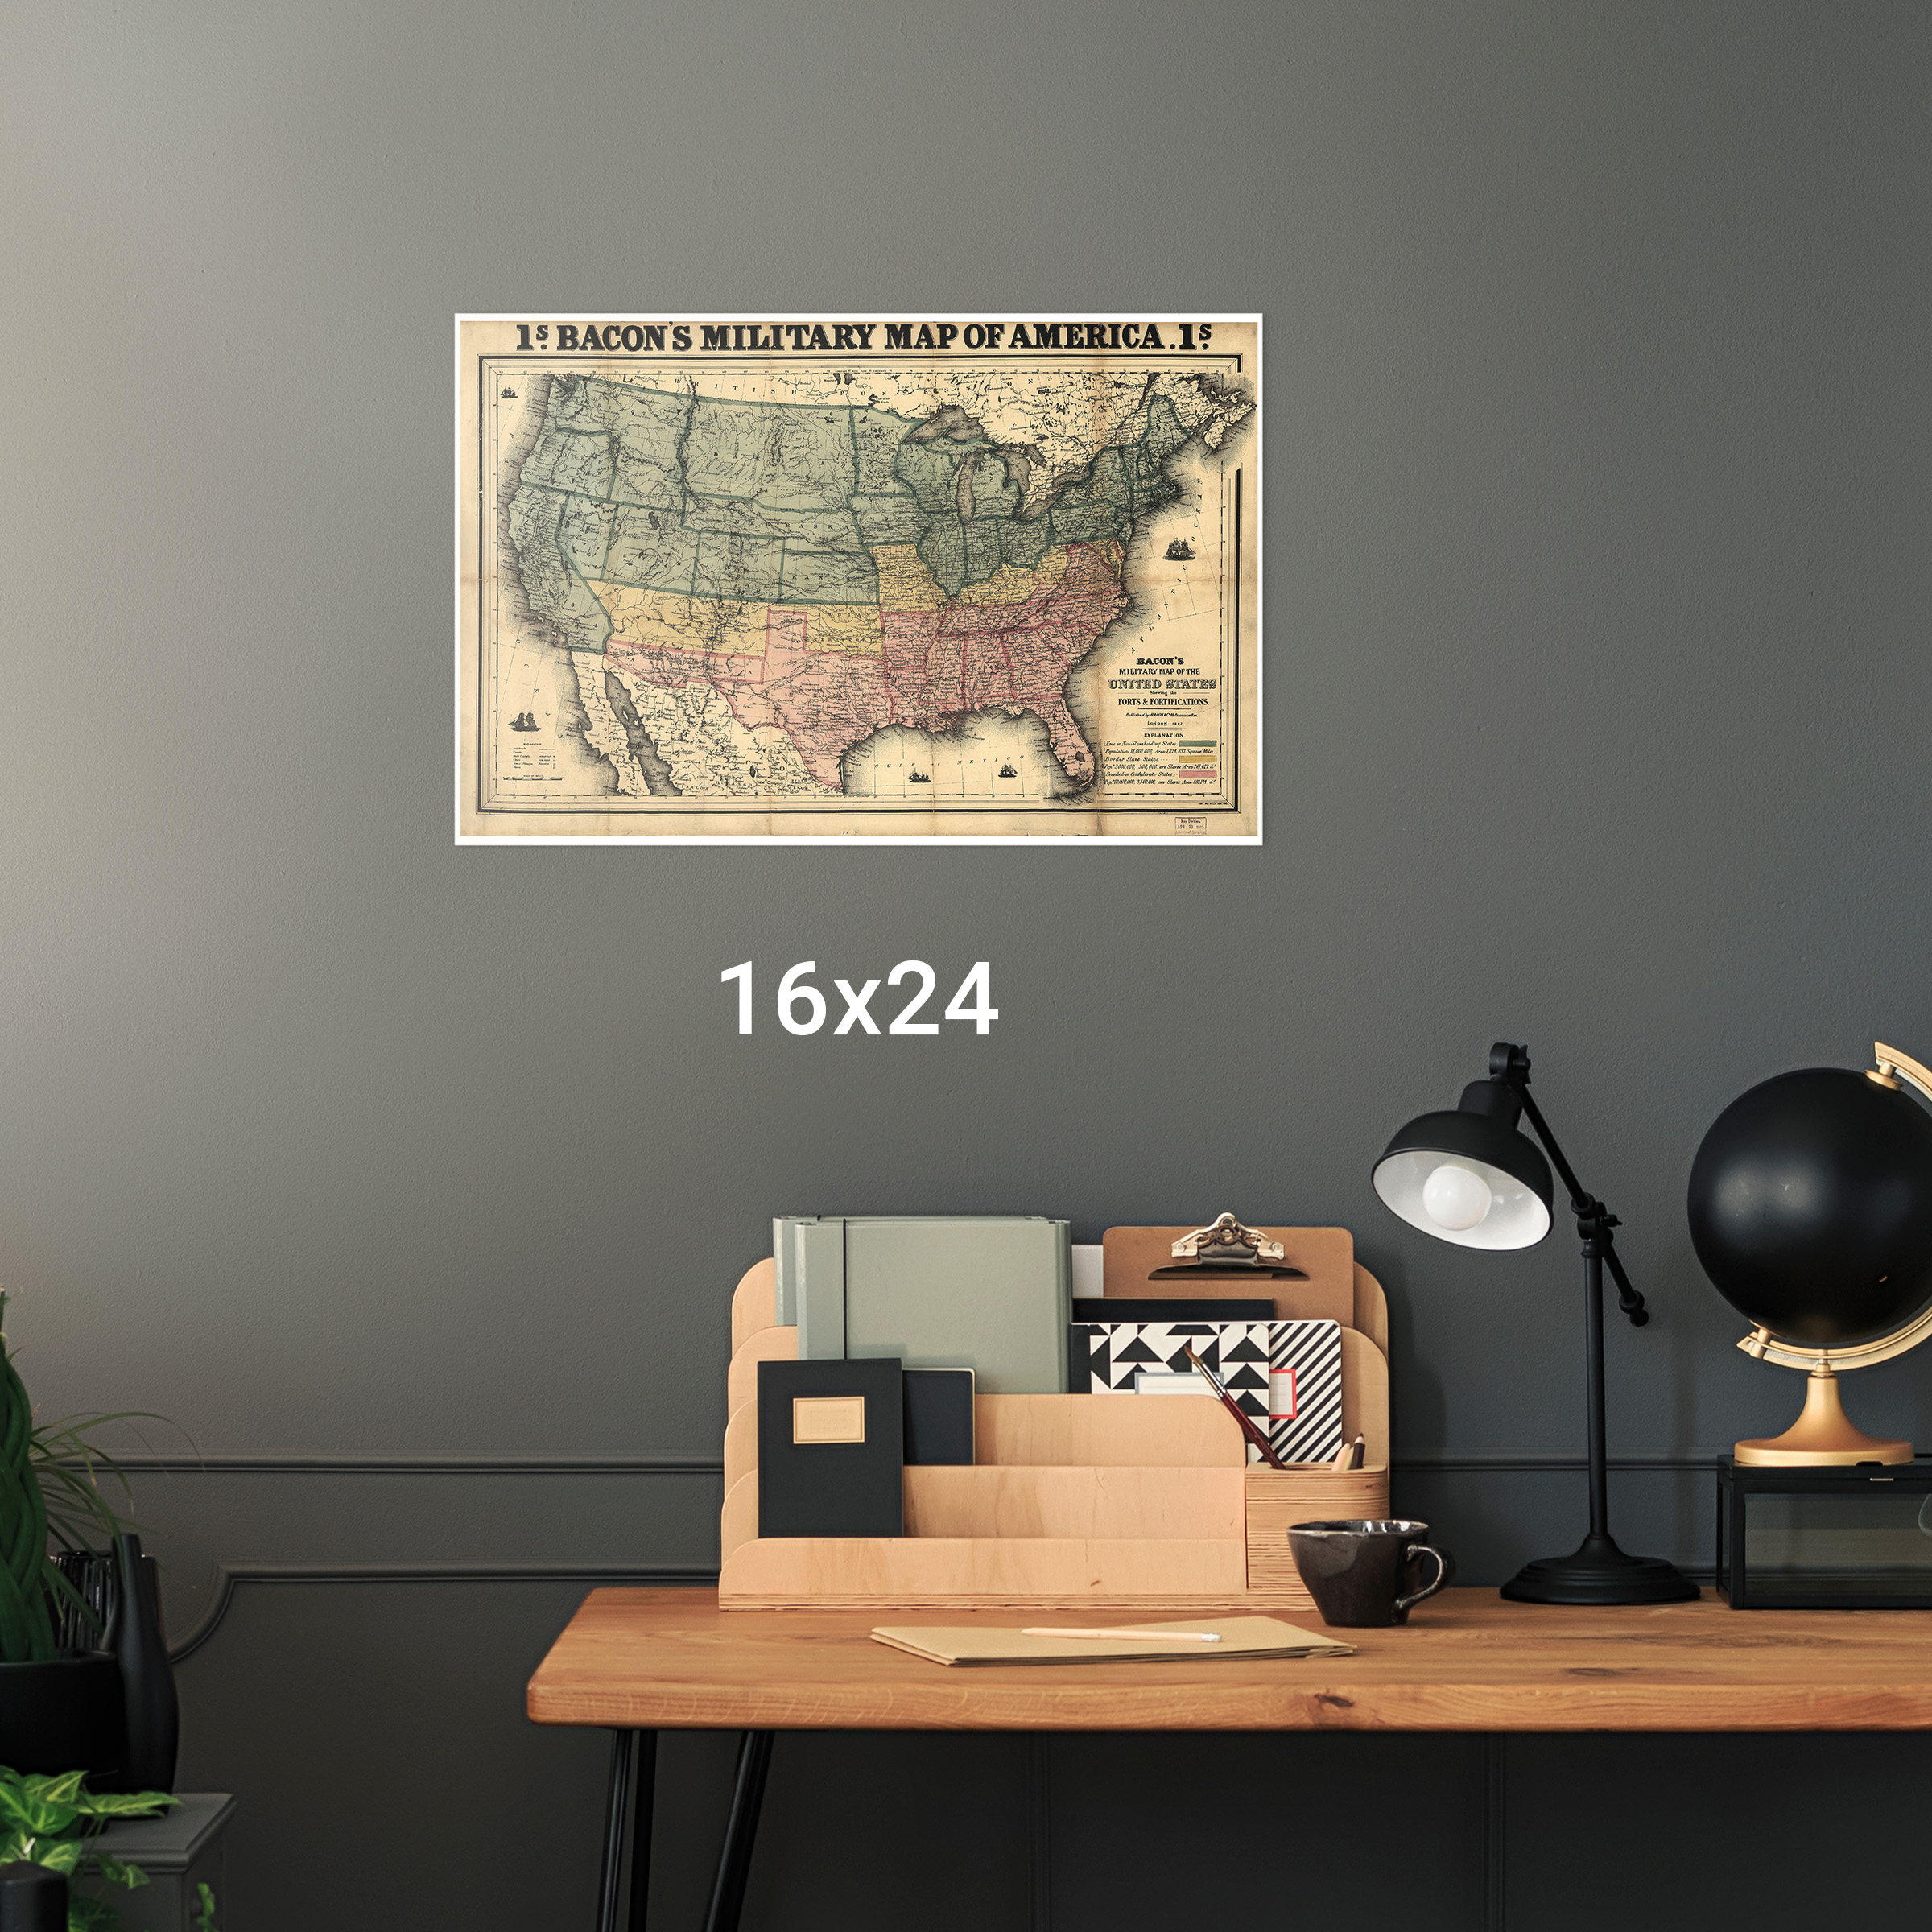 1863 Bacon's Civil War Map of the Southern States 20x30 